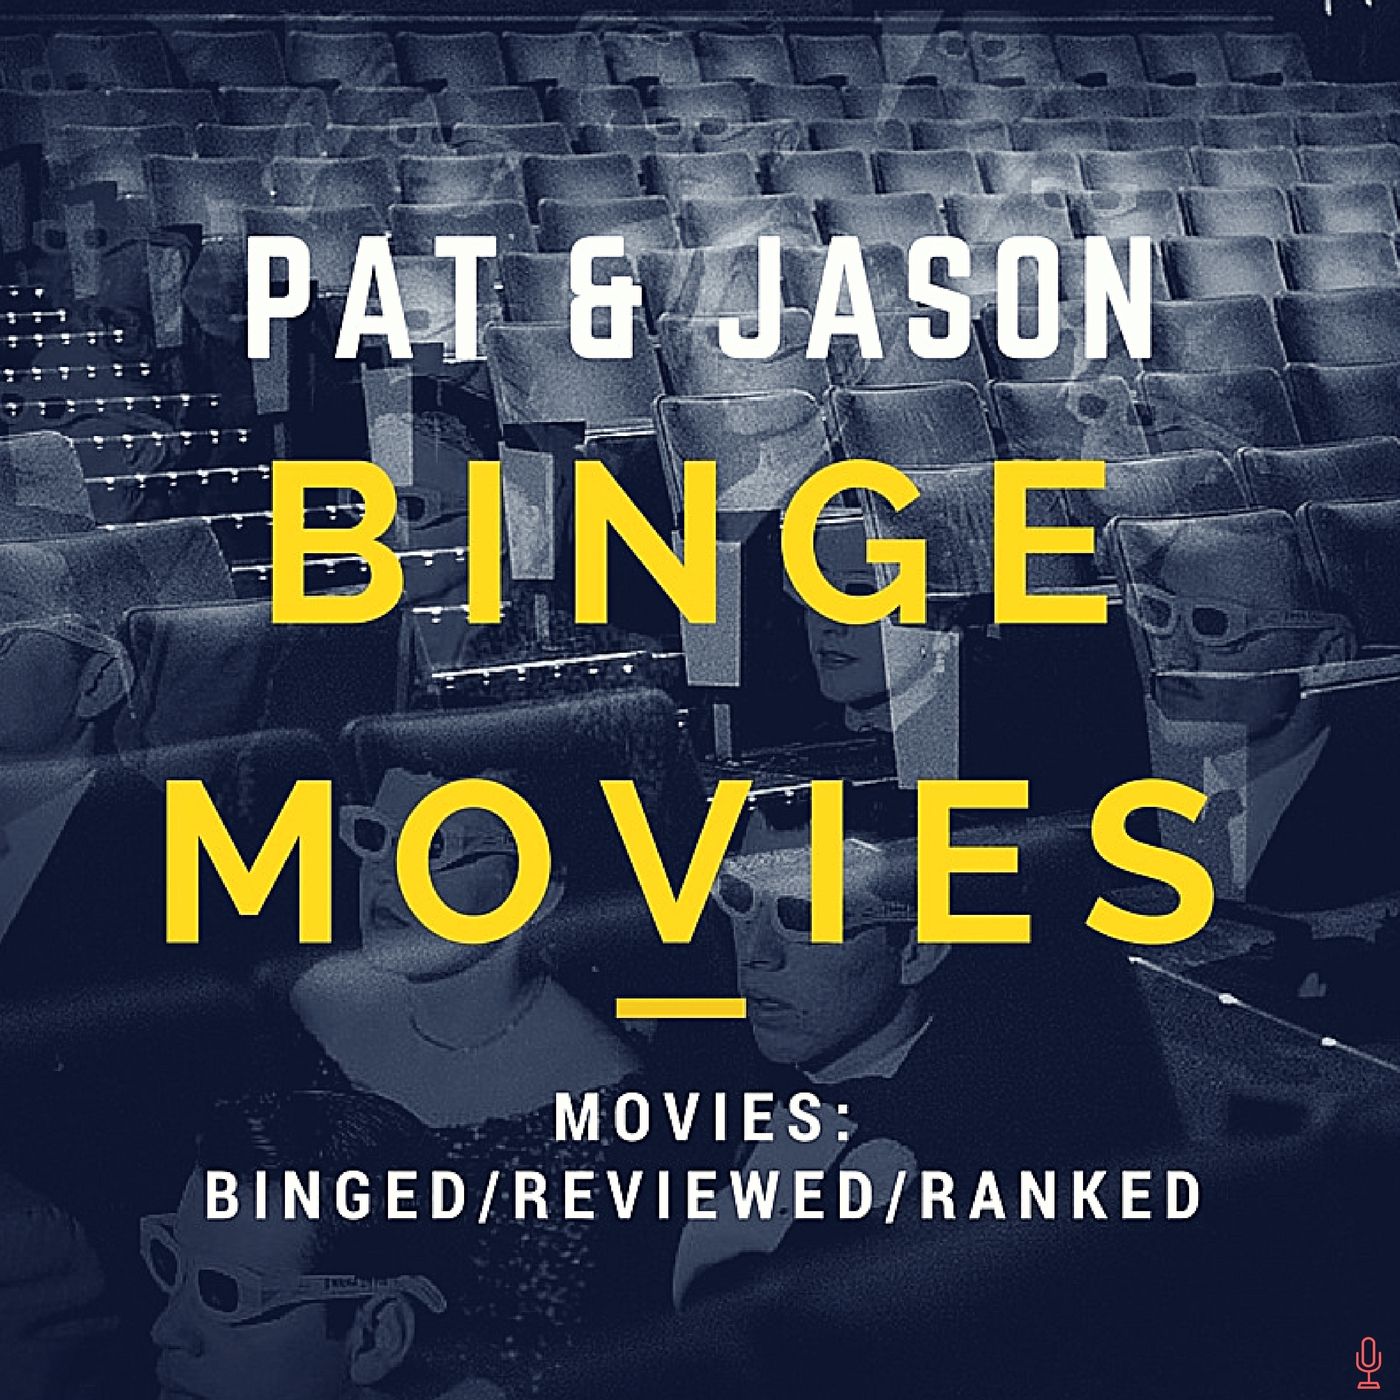 Pat & Jason Binge Movies | Movie Discussions, Reviews, and Rankings